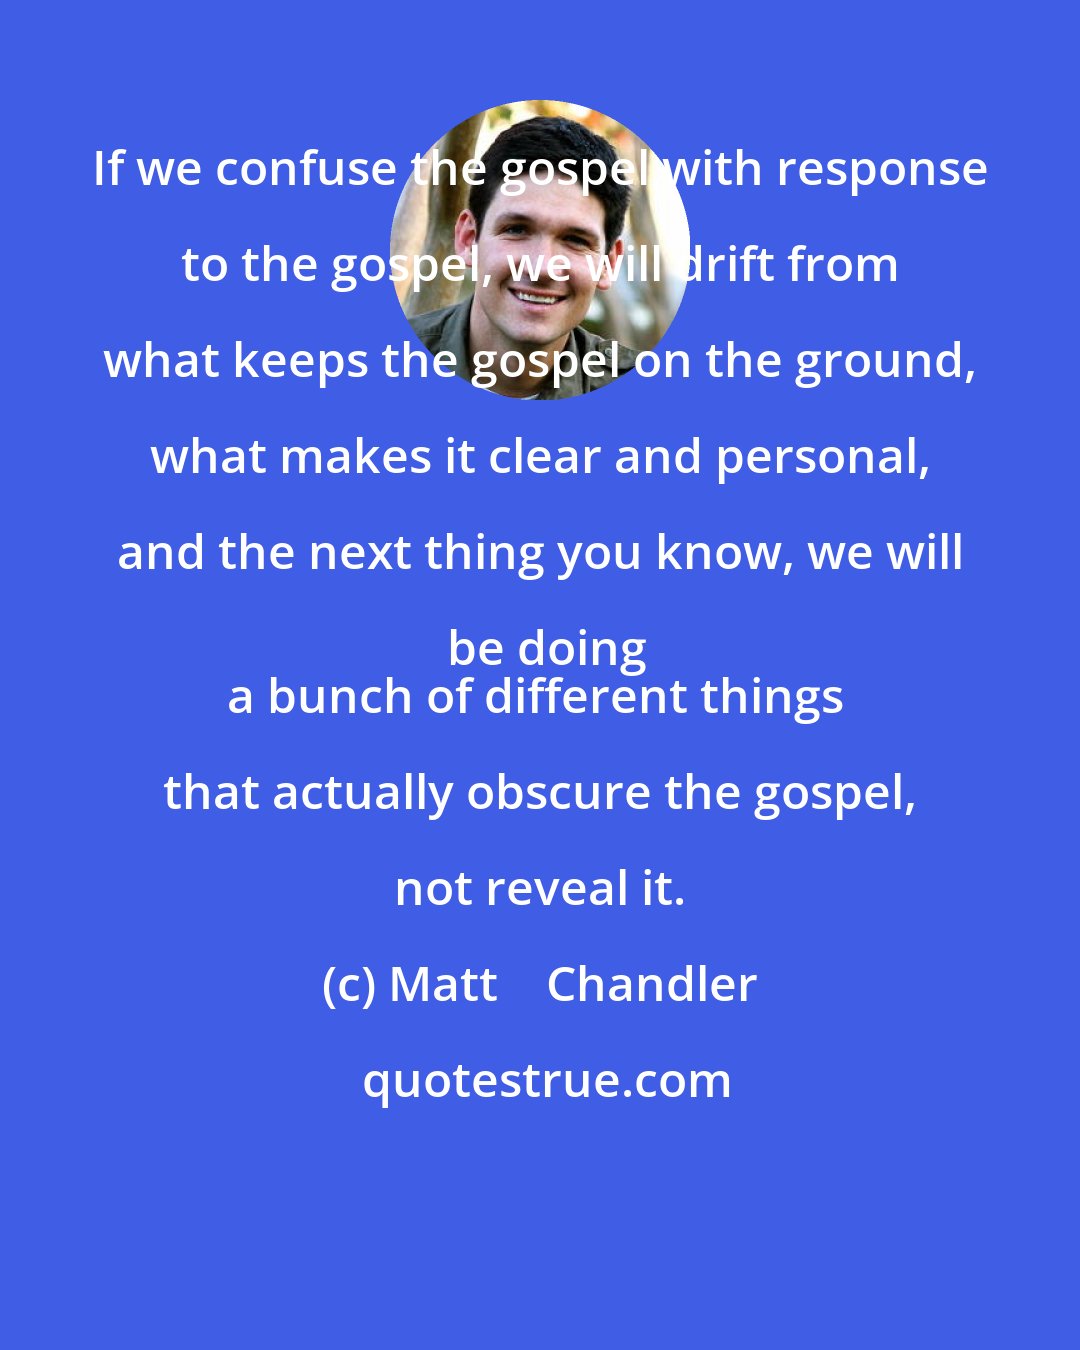 Matt    Chandler: If we confuse the gospel with response to the gospel, we will drift from what keeps the gospel on the ground, what makes it clear and personal, and the next thing you know, we will be doing
a bunch of different things that actually obscure the gospel, not reveal it.